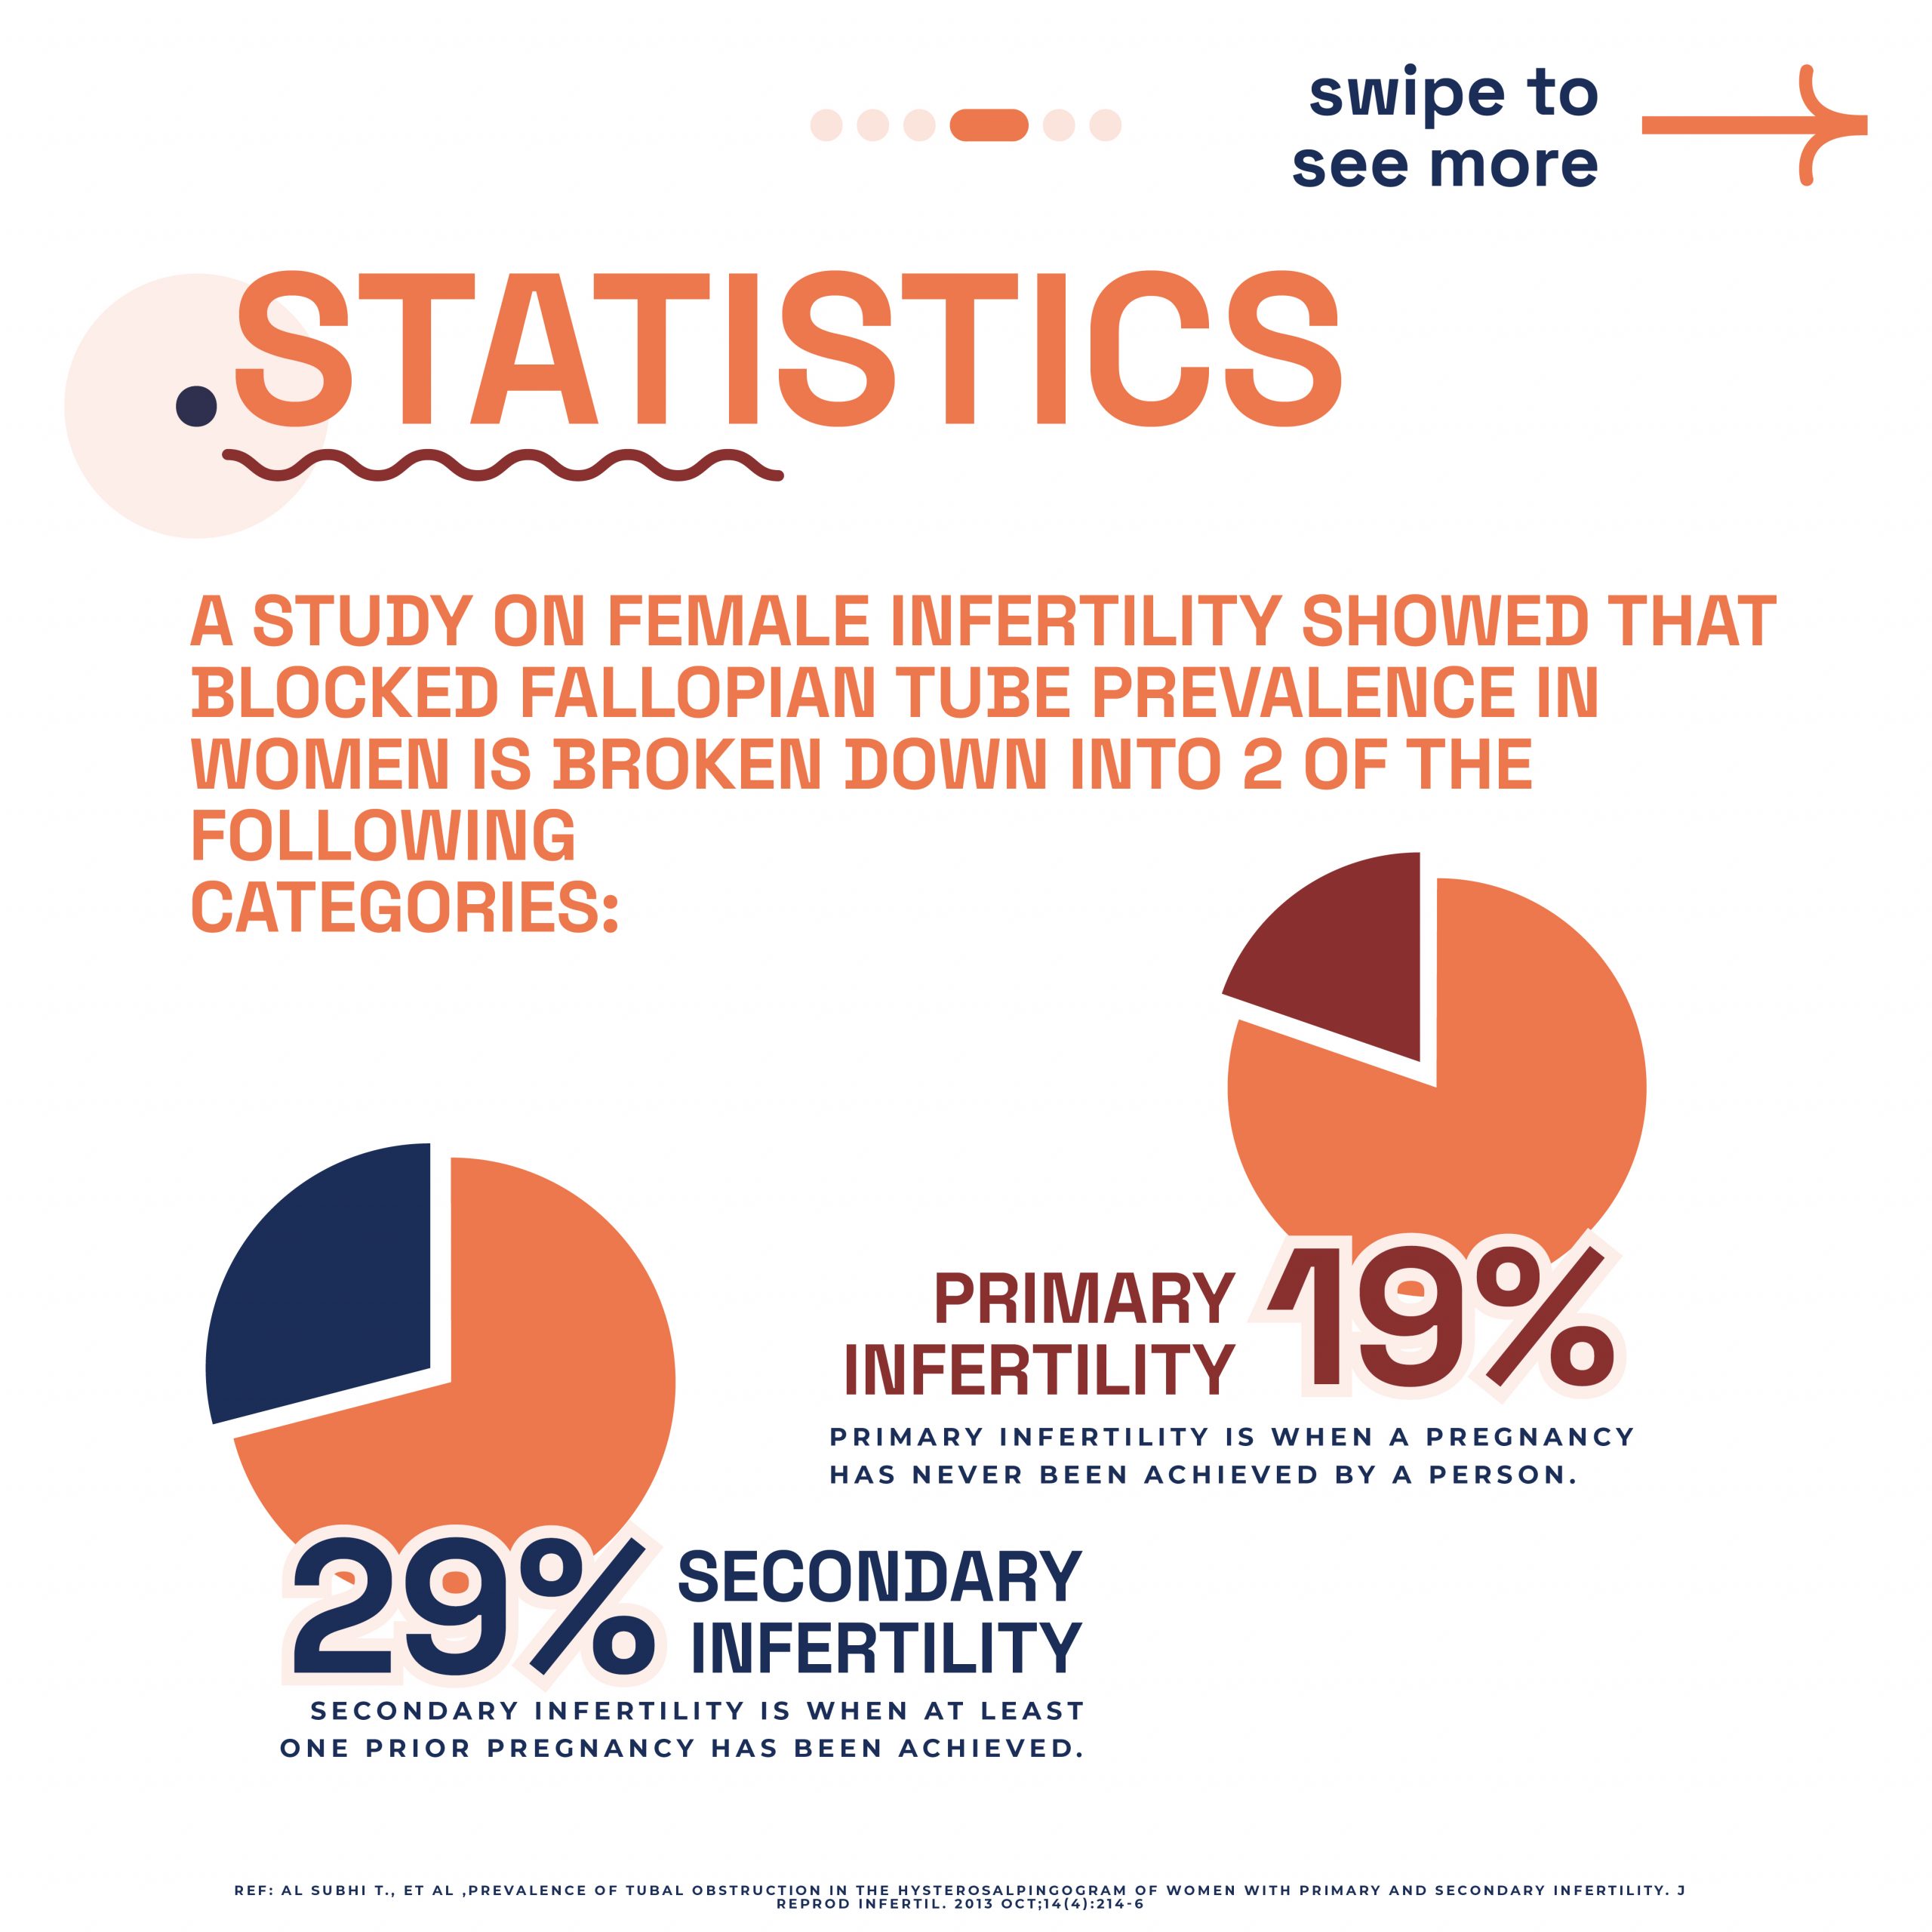 Infographic showing statistics on blocked fallopian tube prevalence in women, as part of London Pregnancy Clinic's fertility resources.